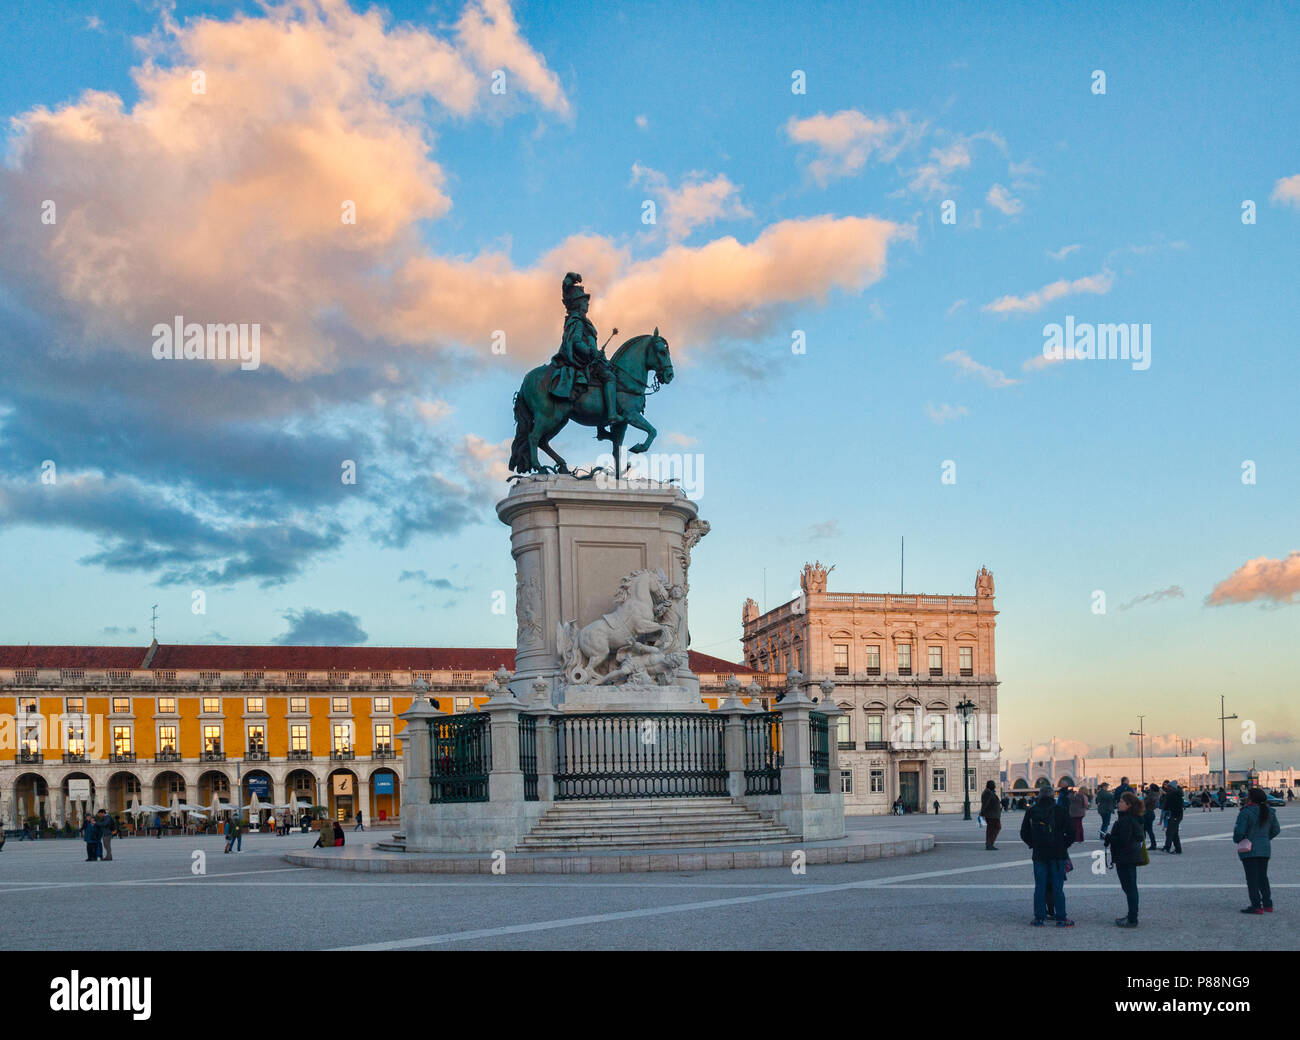 6 March 2018: Lisbon, Portugal -  Praca do Comercio, or Commercial Square, with the equestrian statue of King Jose I, at sunset. Stock Photo